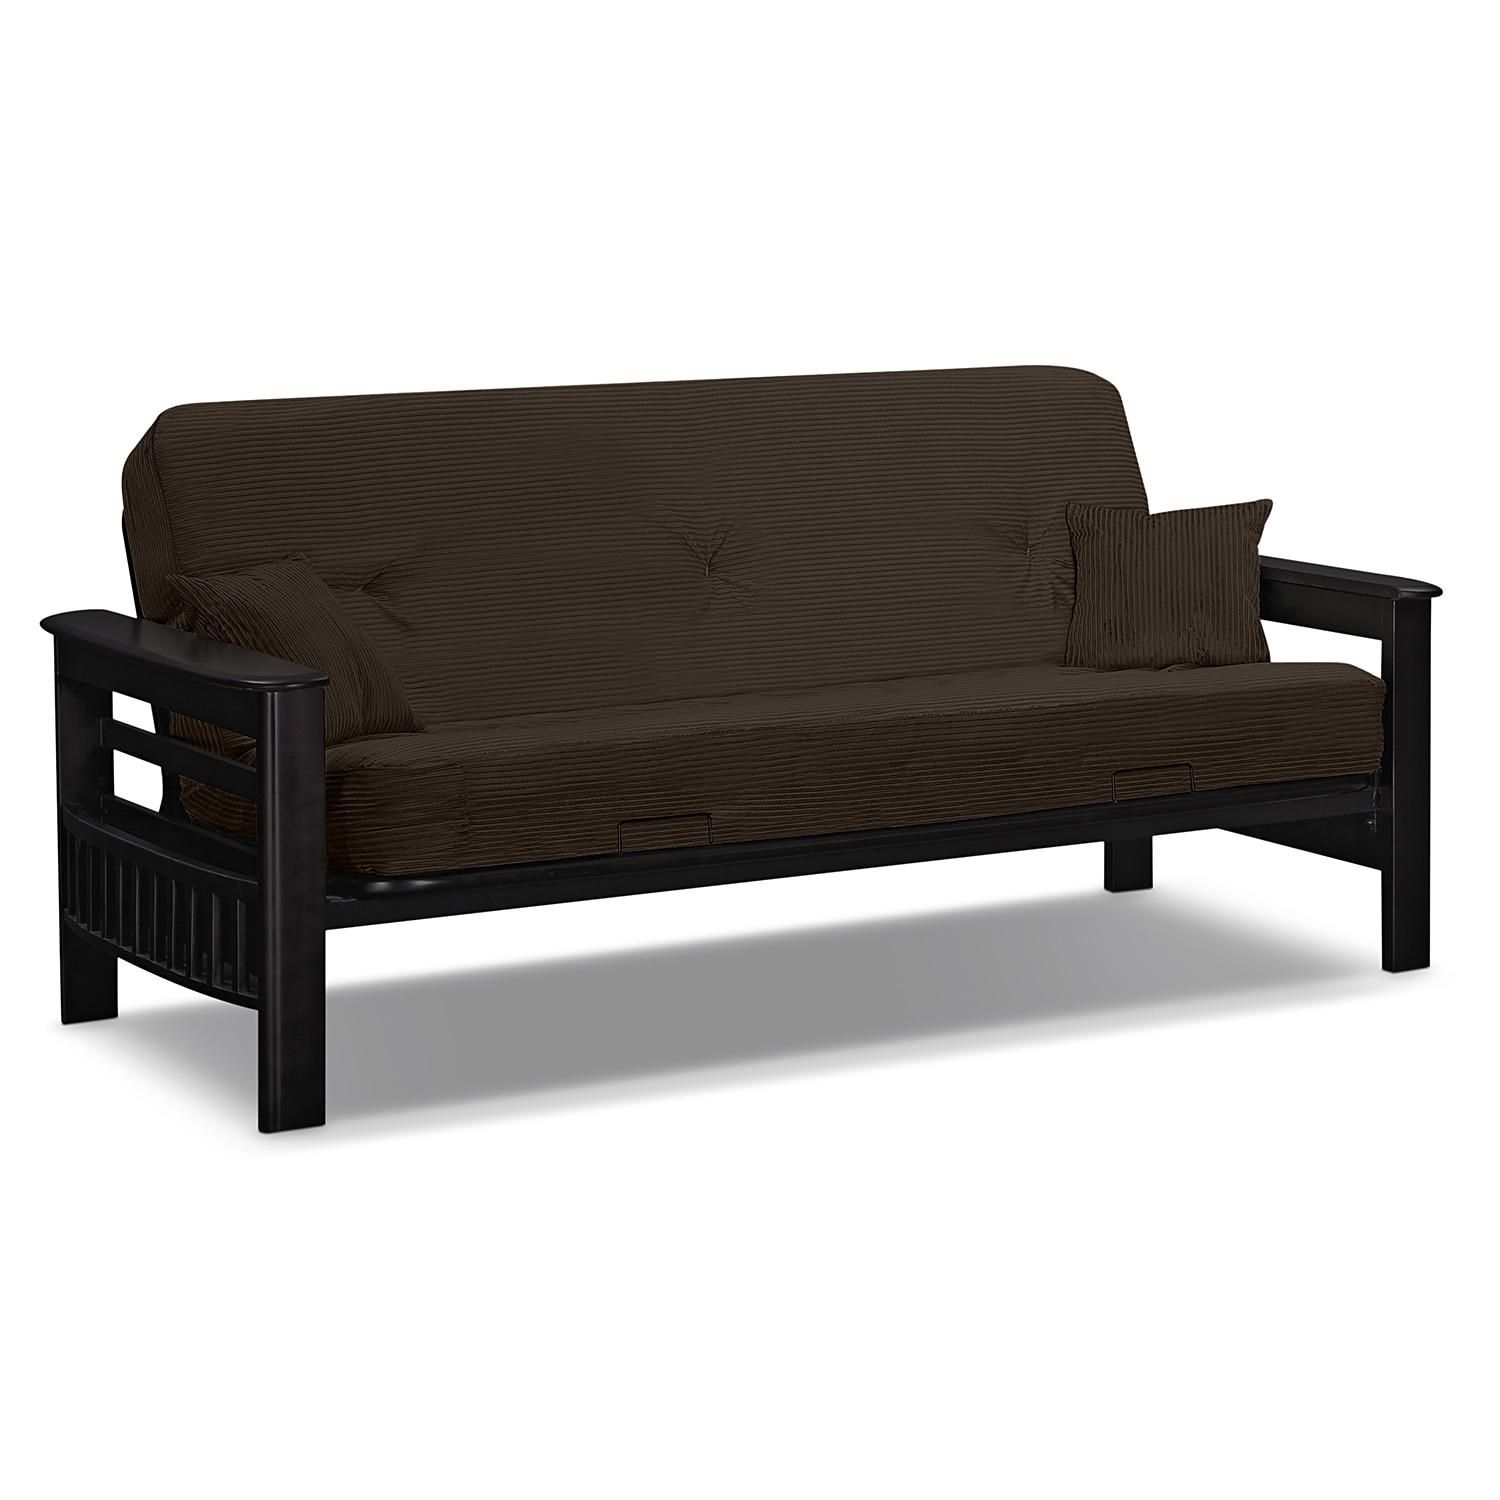 Tampa Futon Sofa Bed – Brown | Value City Furniture Throughout Sofas Tampa (View 15 of 20)